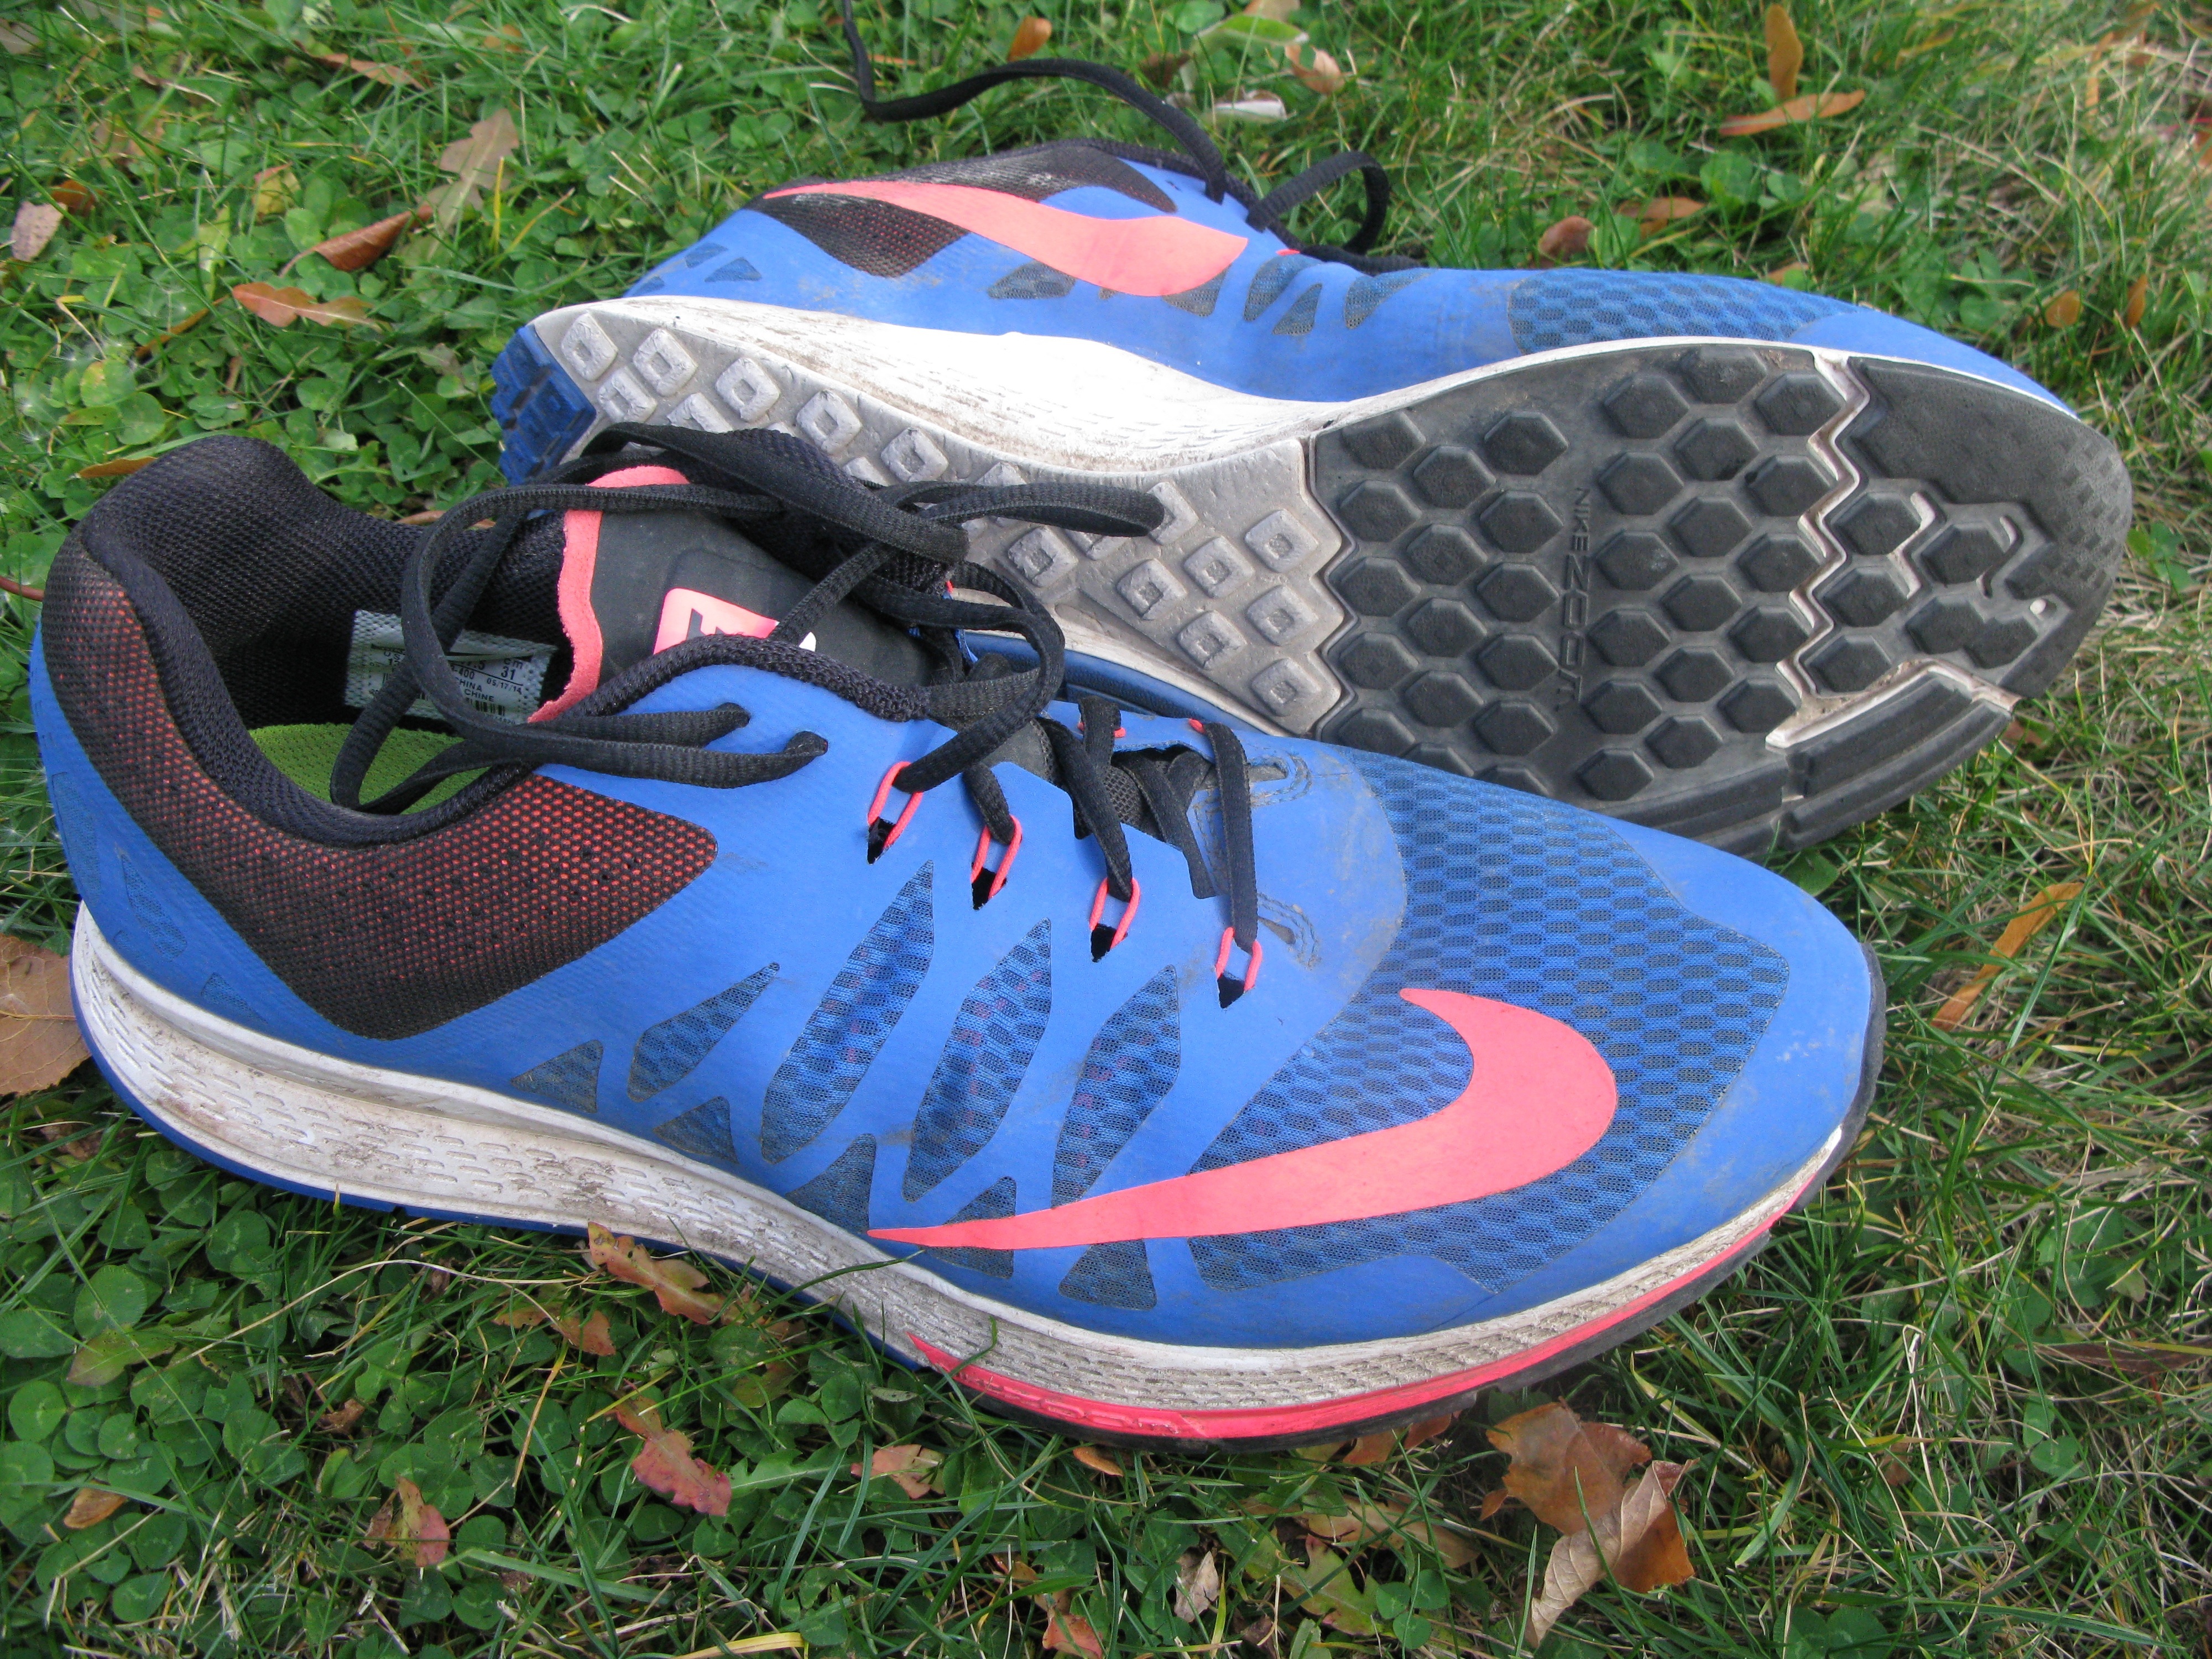 Nike Zoom Elite 7 Review: Versatile All-Around Trainer With Room ...